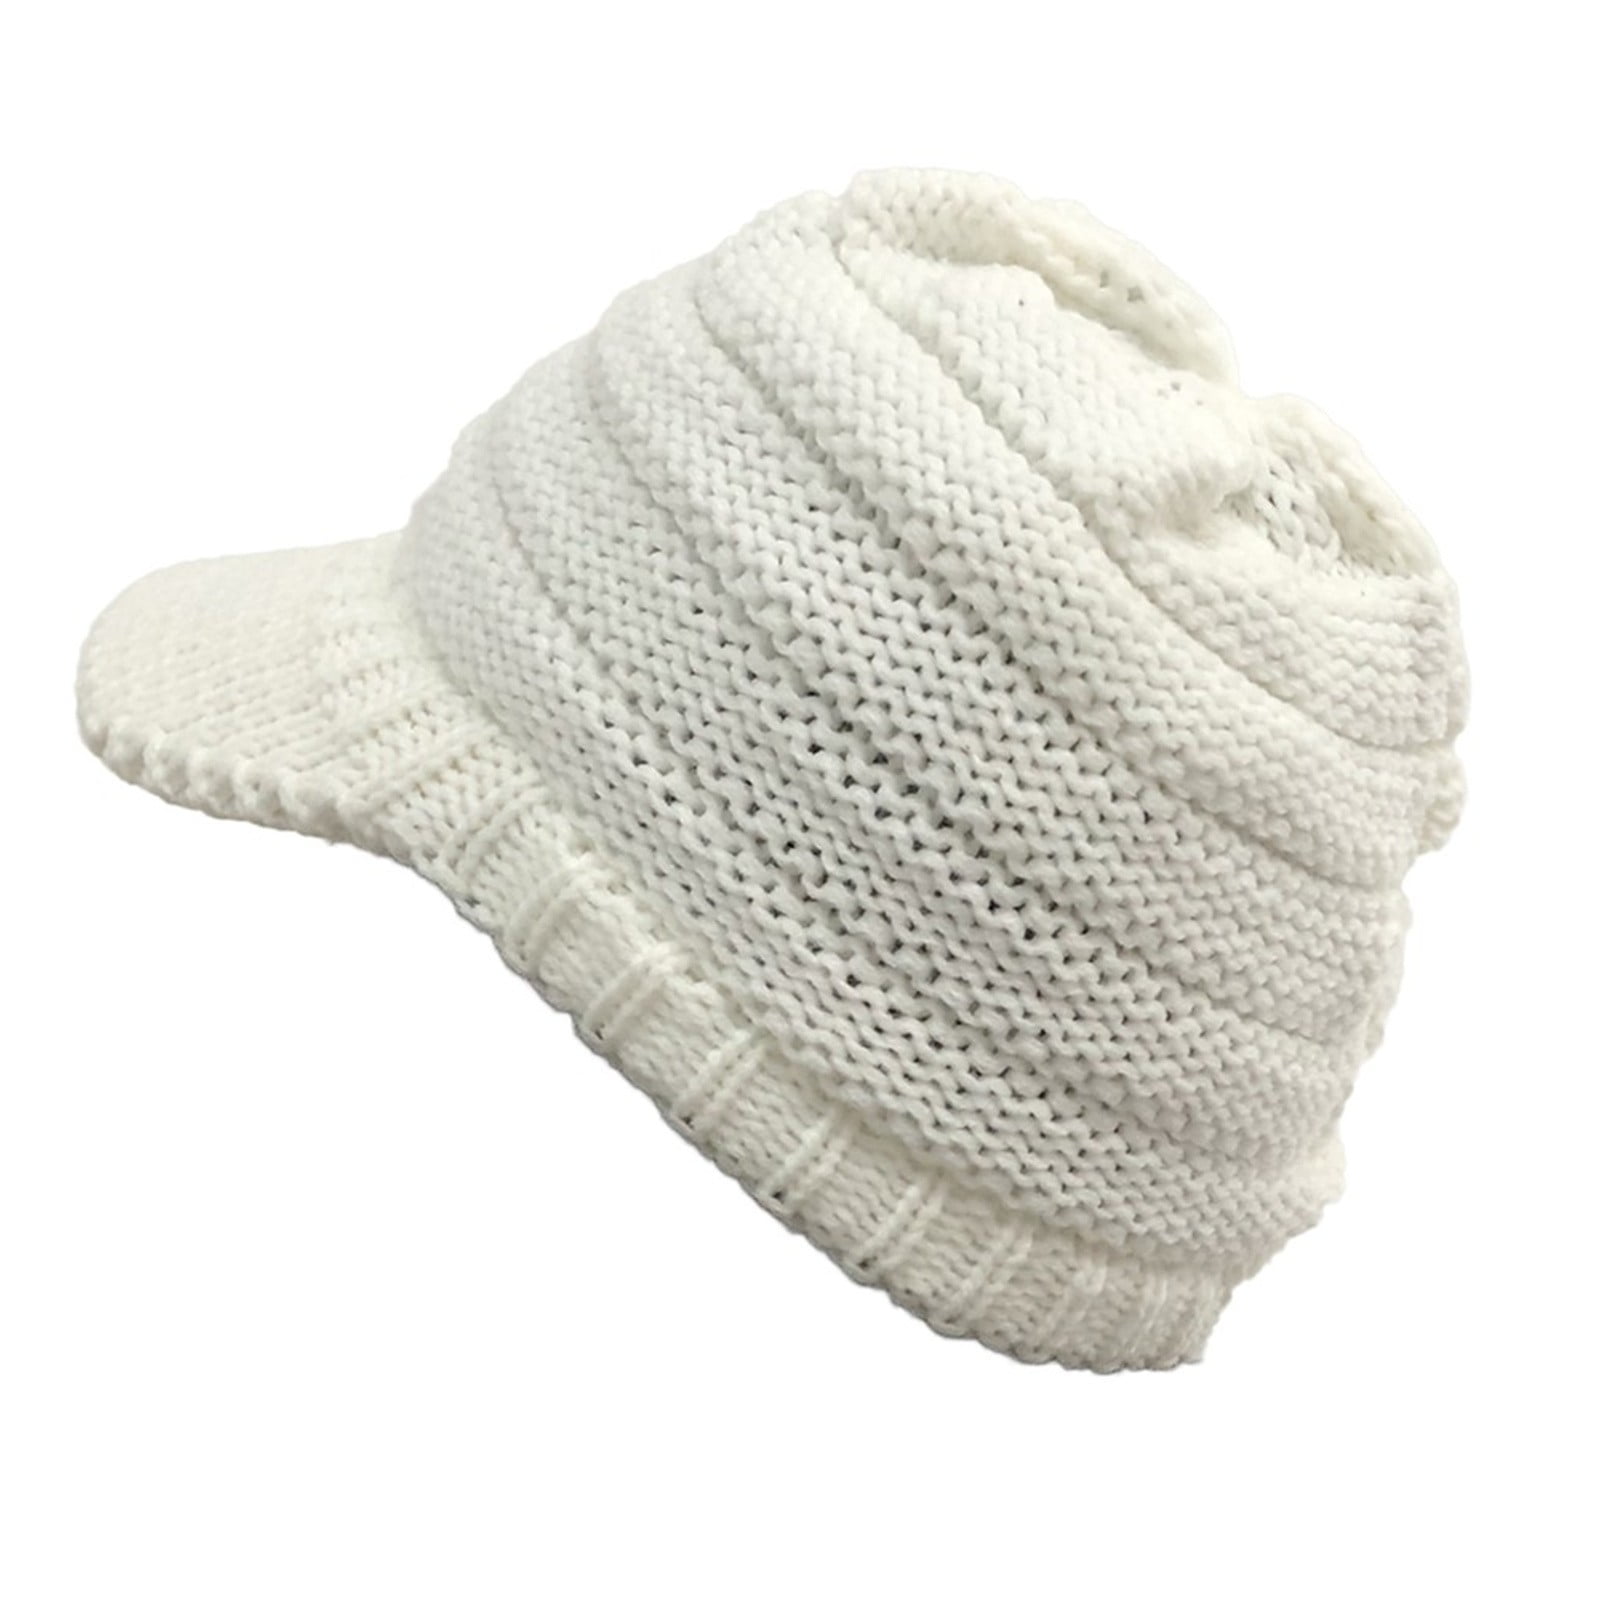 Biziza Womens Cold Weather Cable Knit Beanie Hat Lightweight Cool